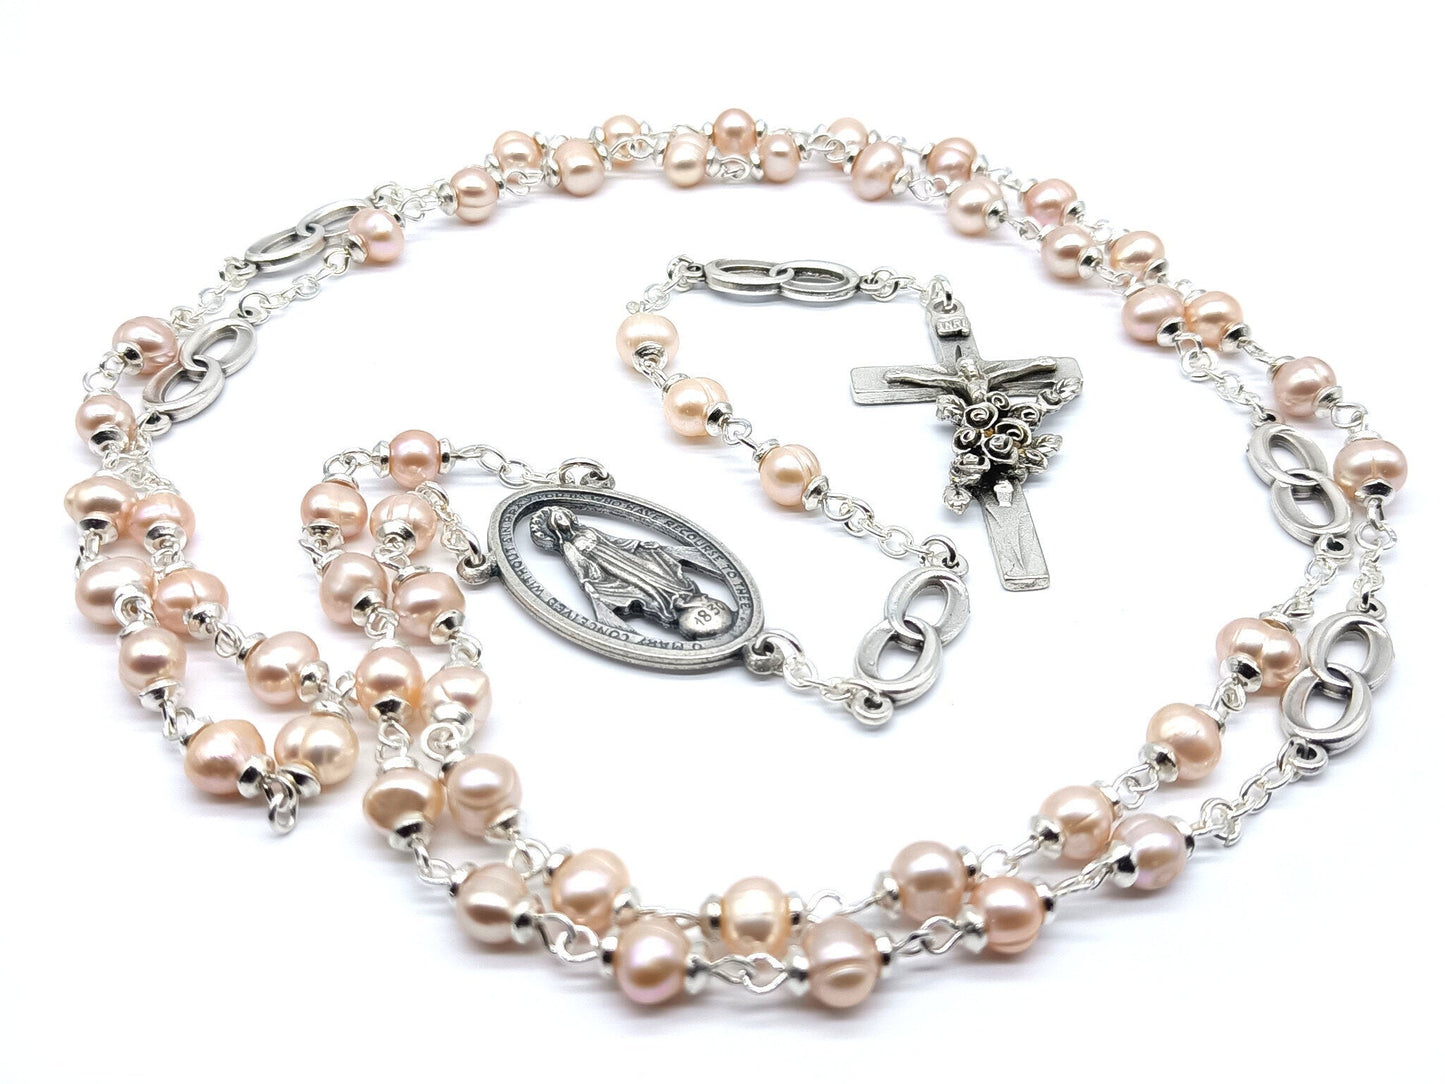 Mother of pearl unique rosary beads wedding rosary with miraculous medal, ring links pater beads and silver crucifix.